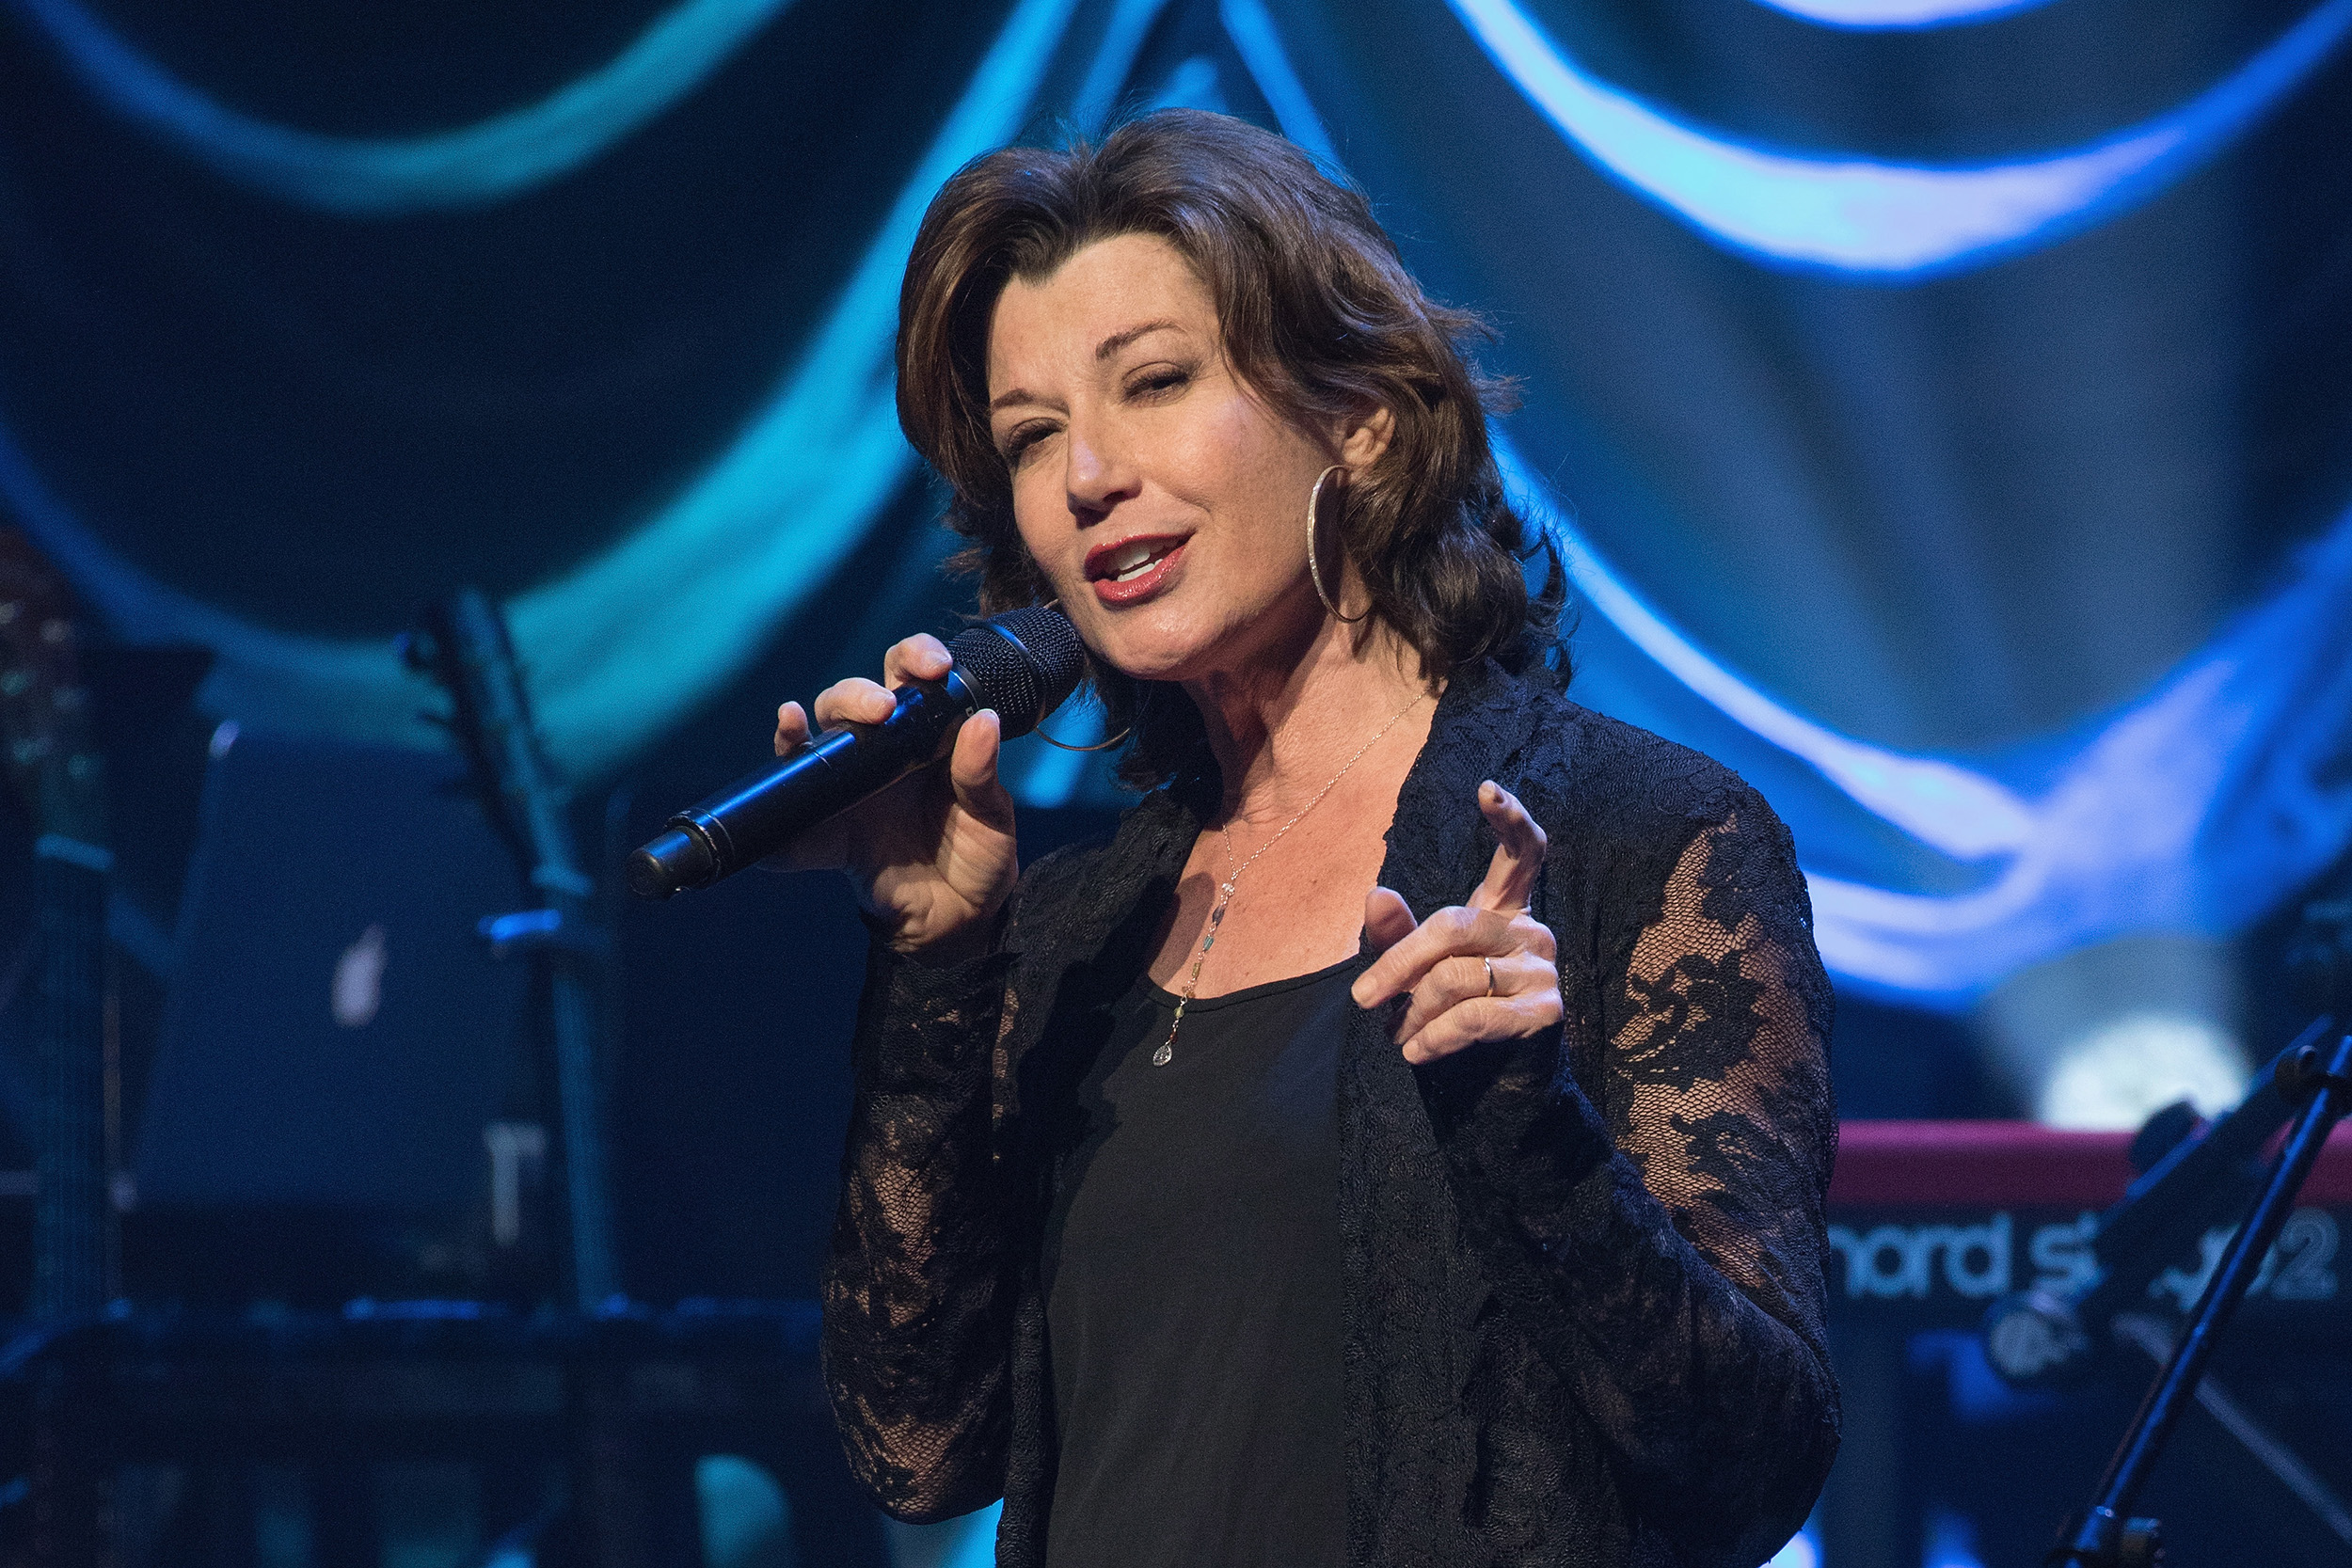 richest gospel artists in the world-Amy Grant